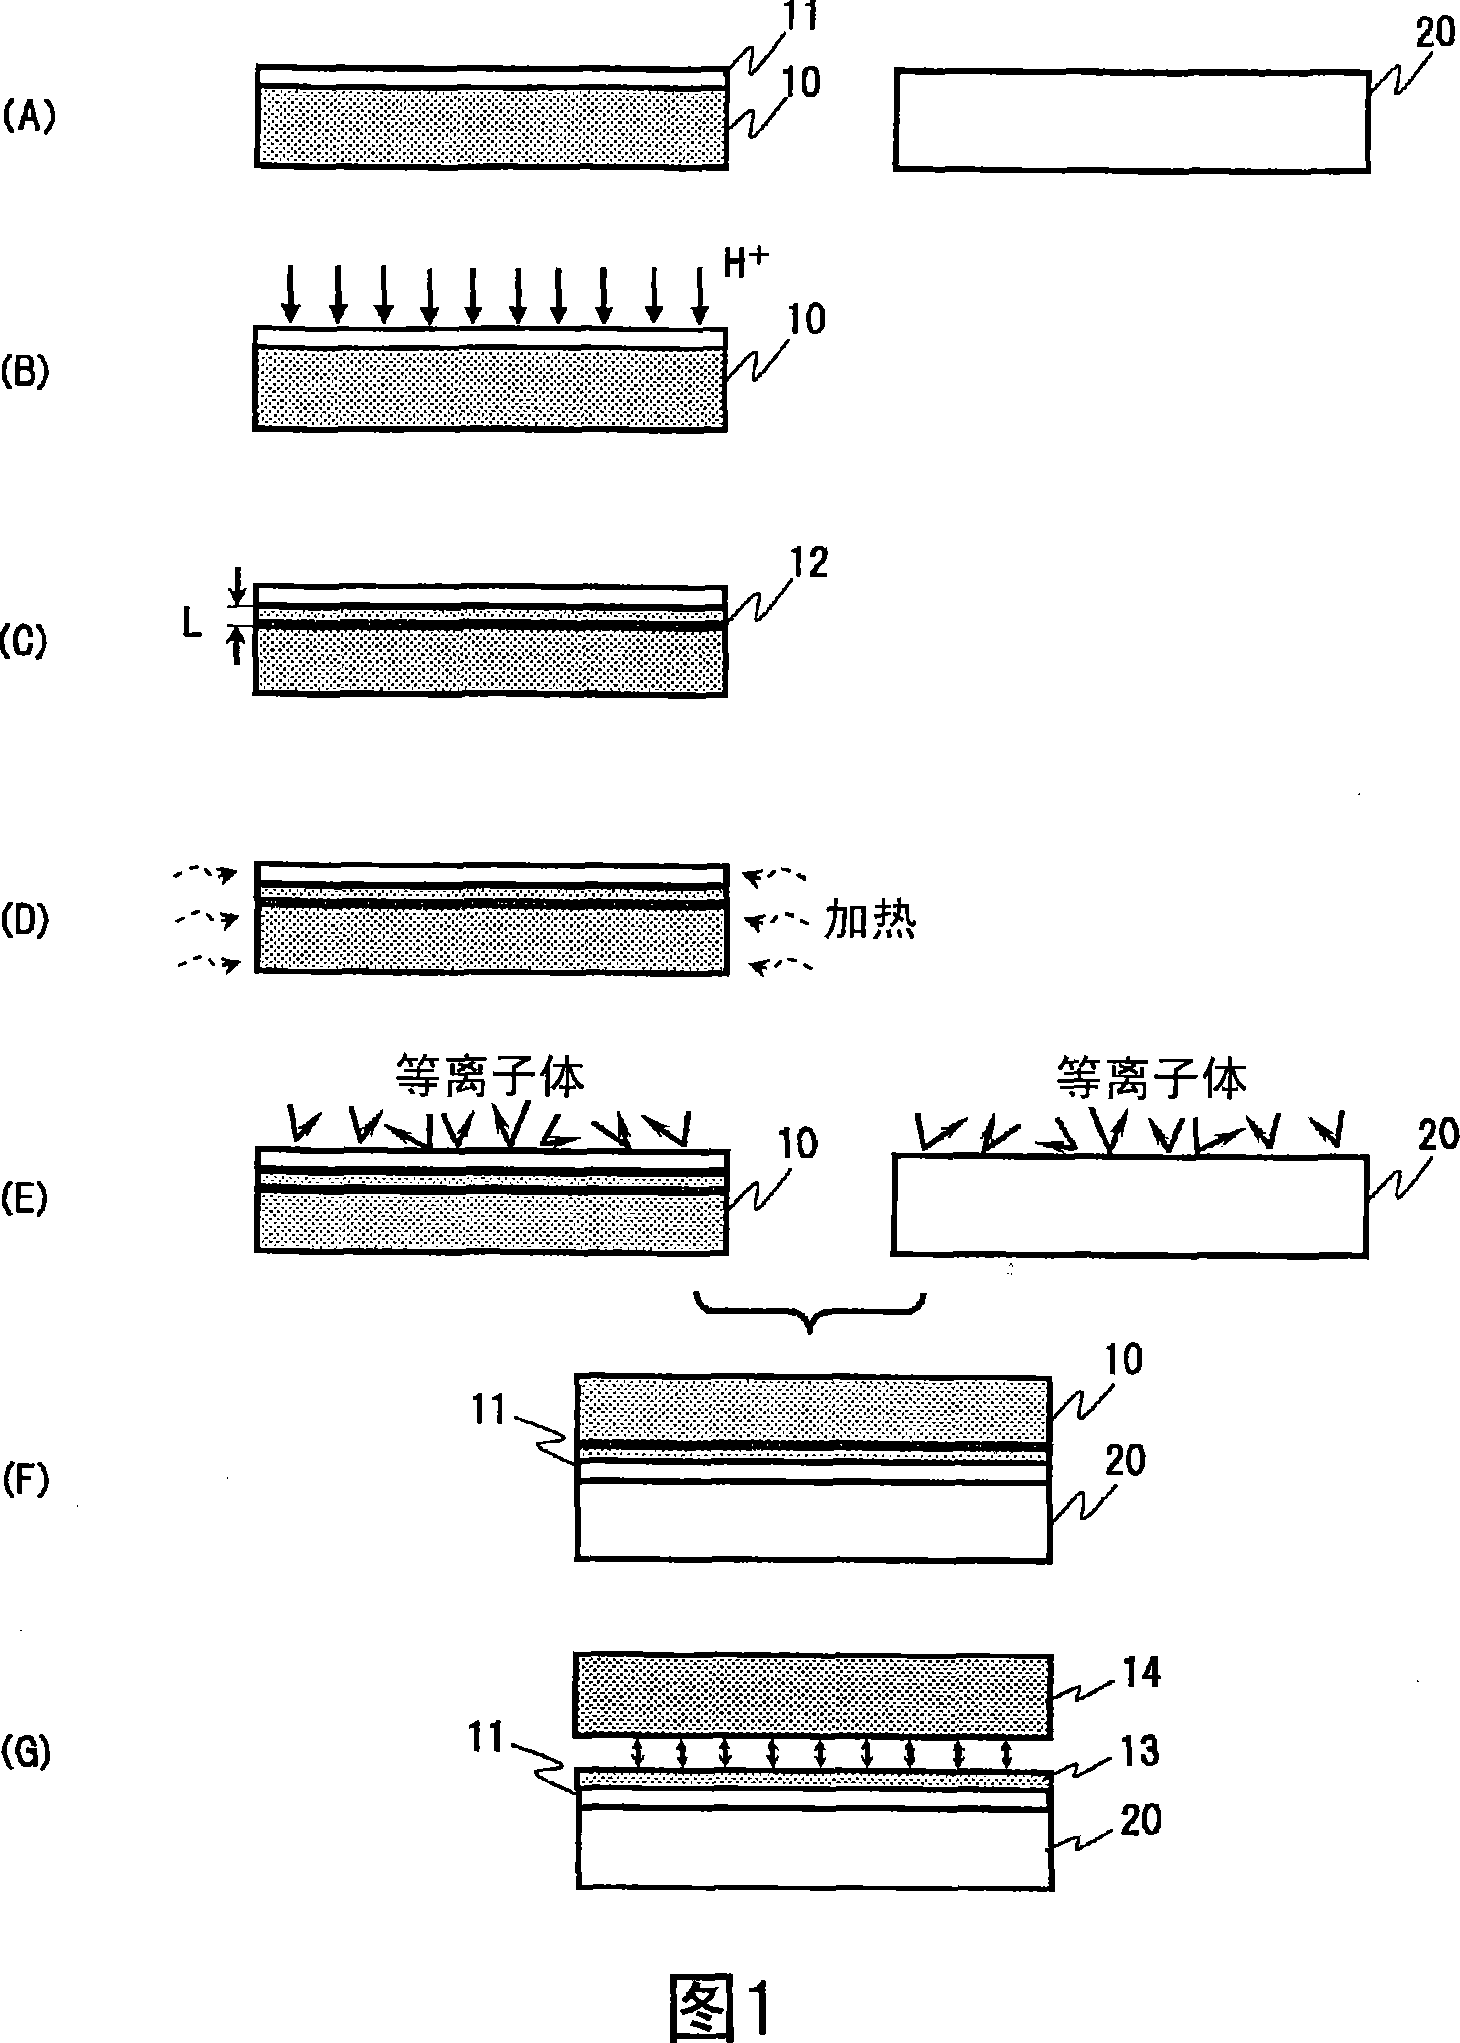 Method for manufacturing an SOI substrate